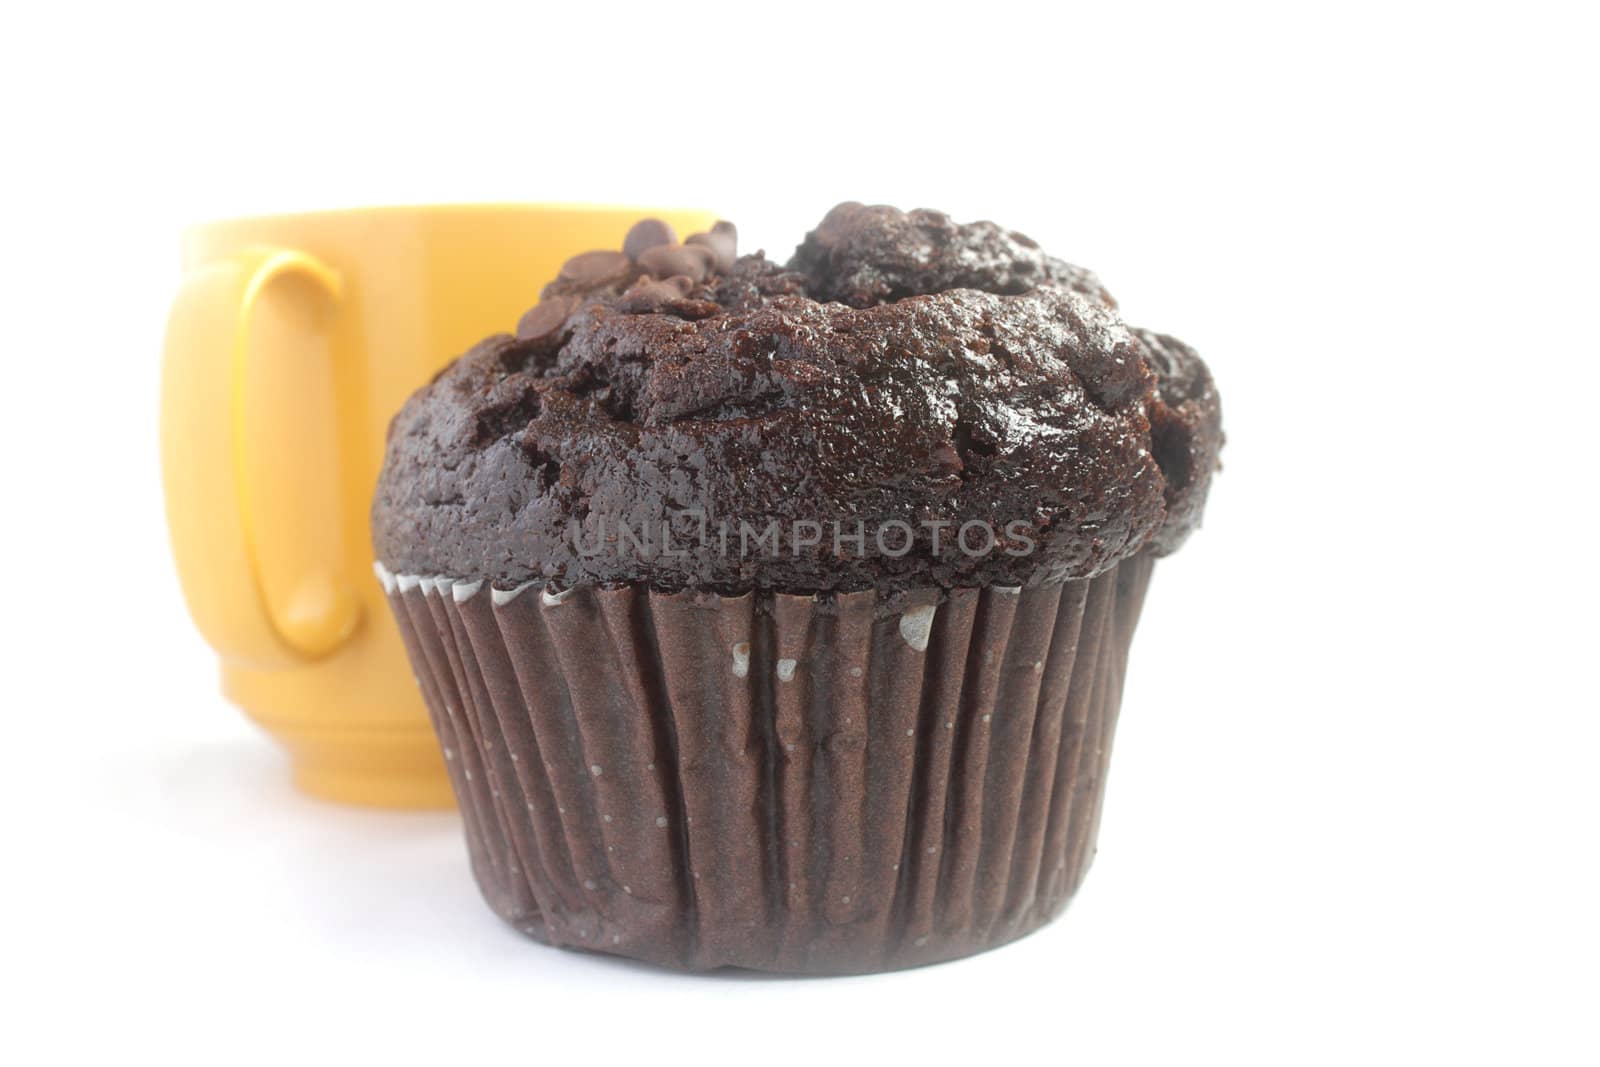 Chocolate muffin and yellow cup on white background by pulen